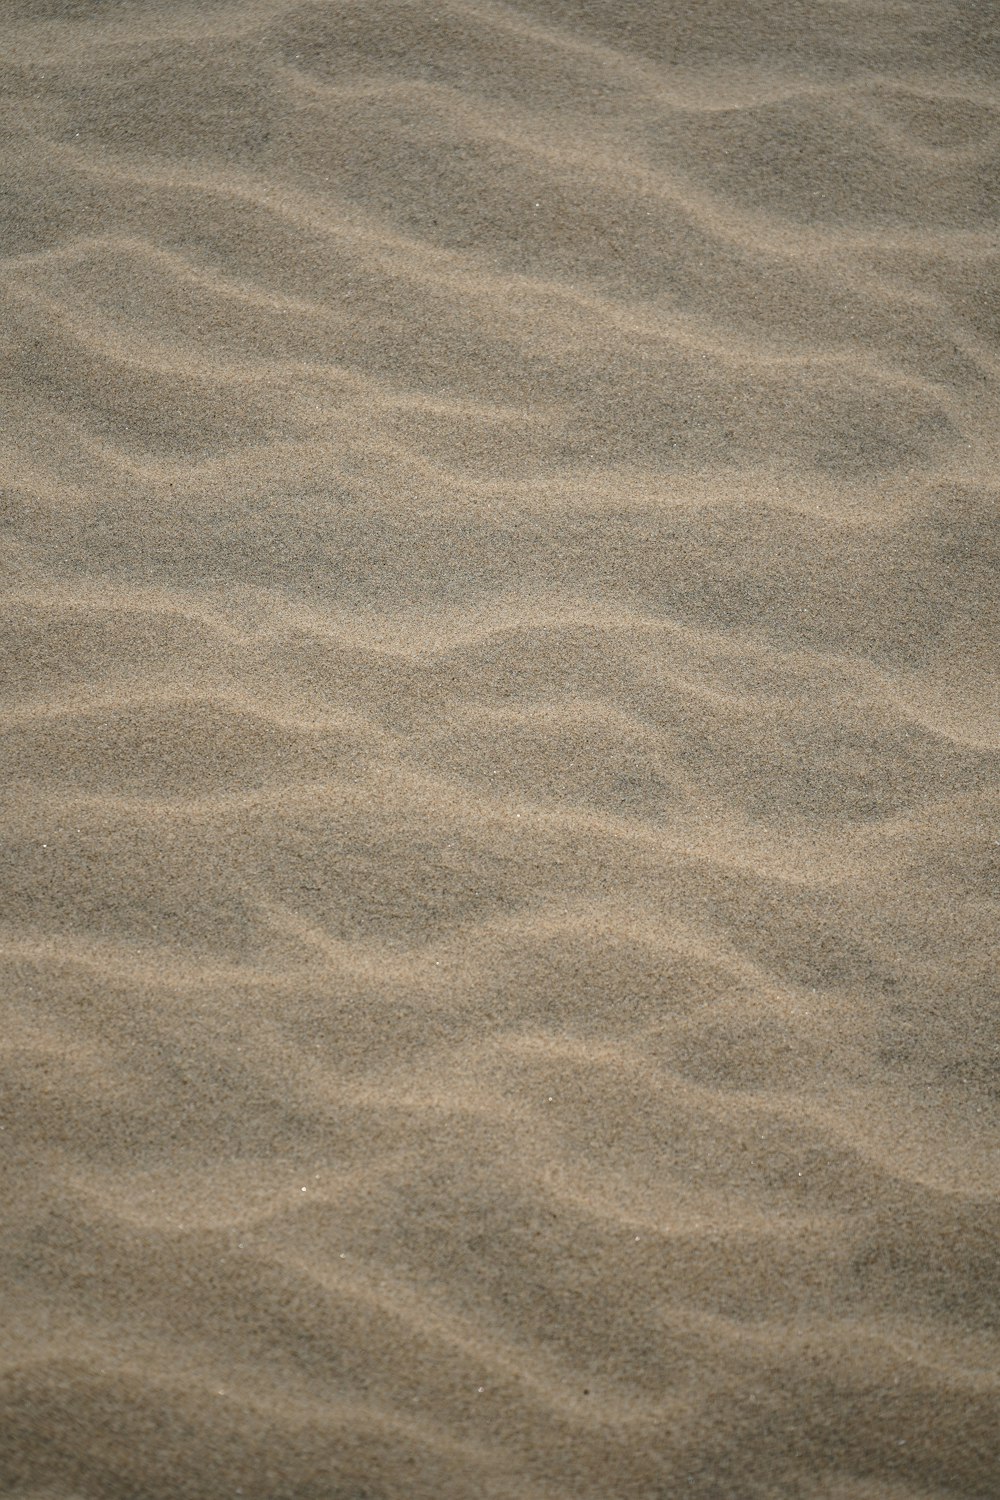 a sandy beach covered in lots of sand